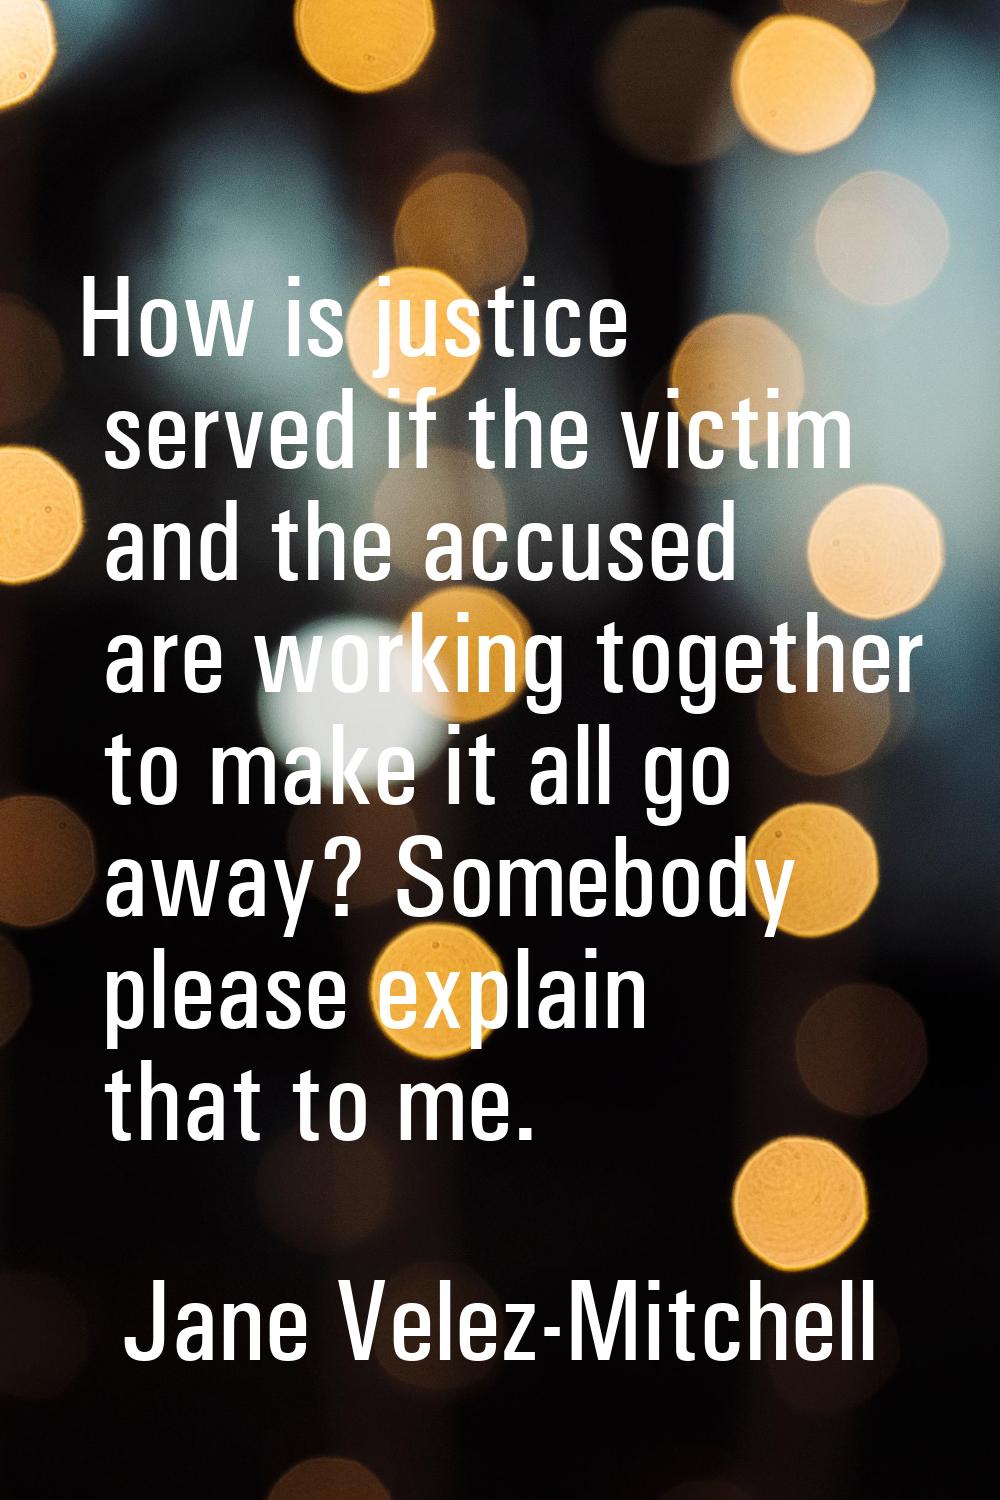 How is justice served if the victim and the accused are working together to make it all go away? So